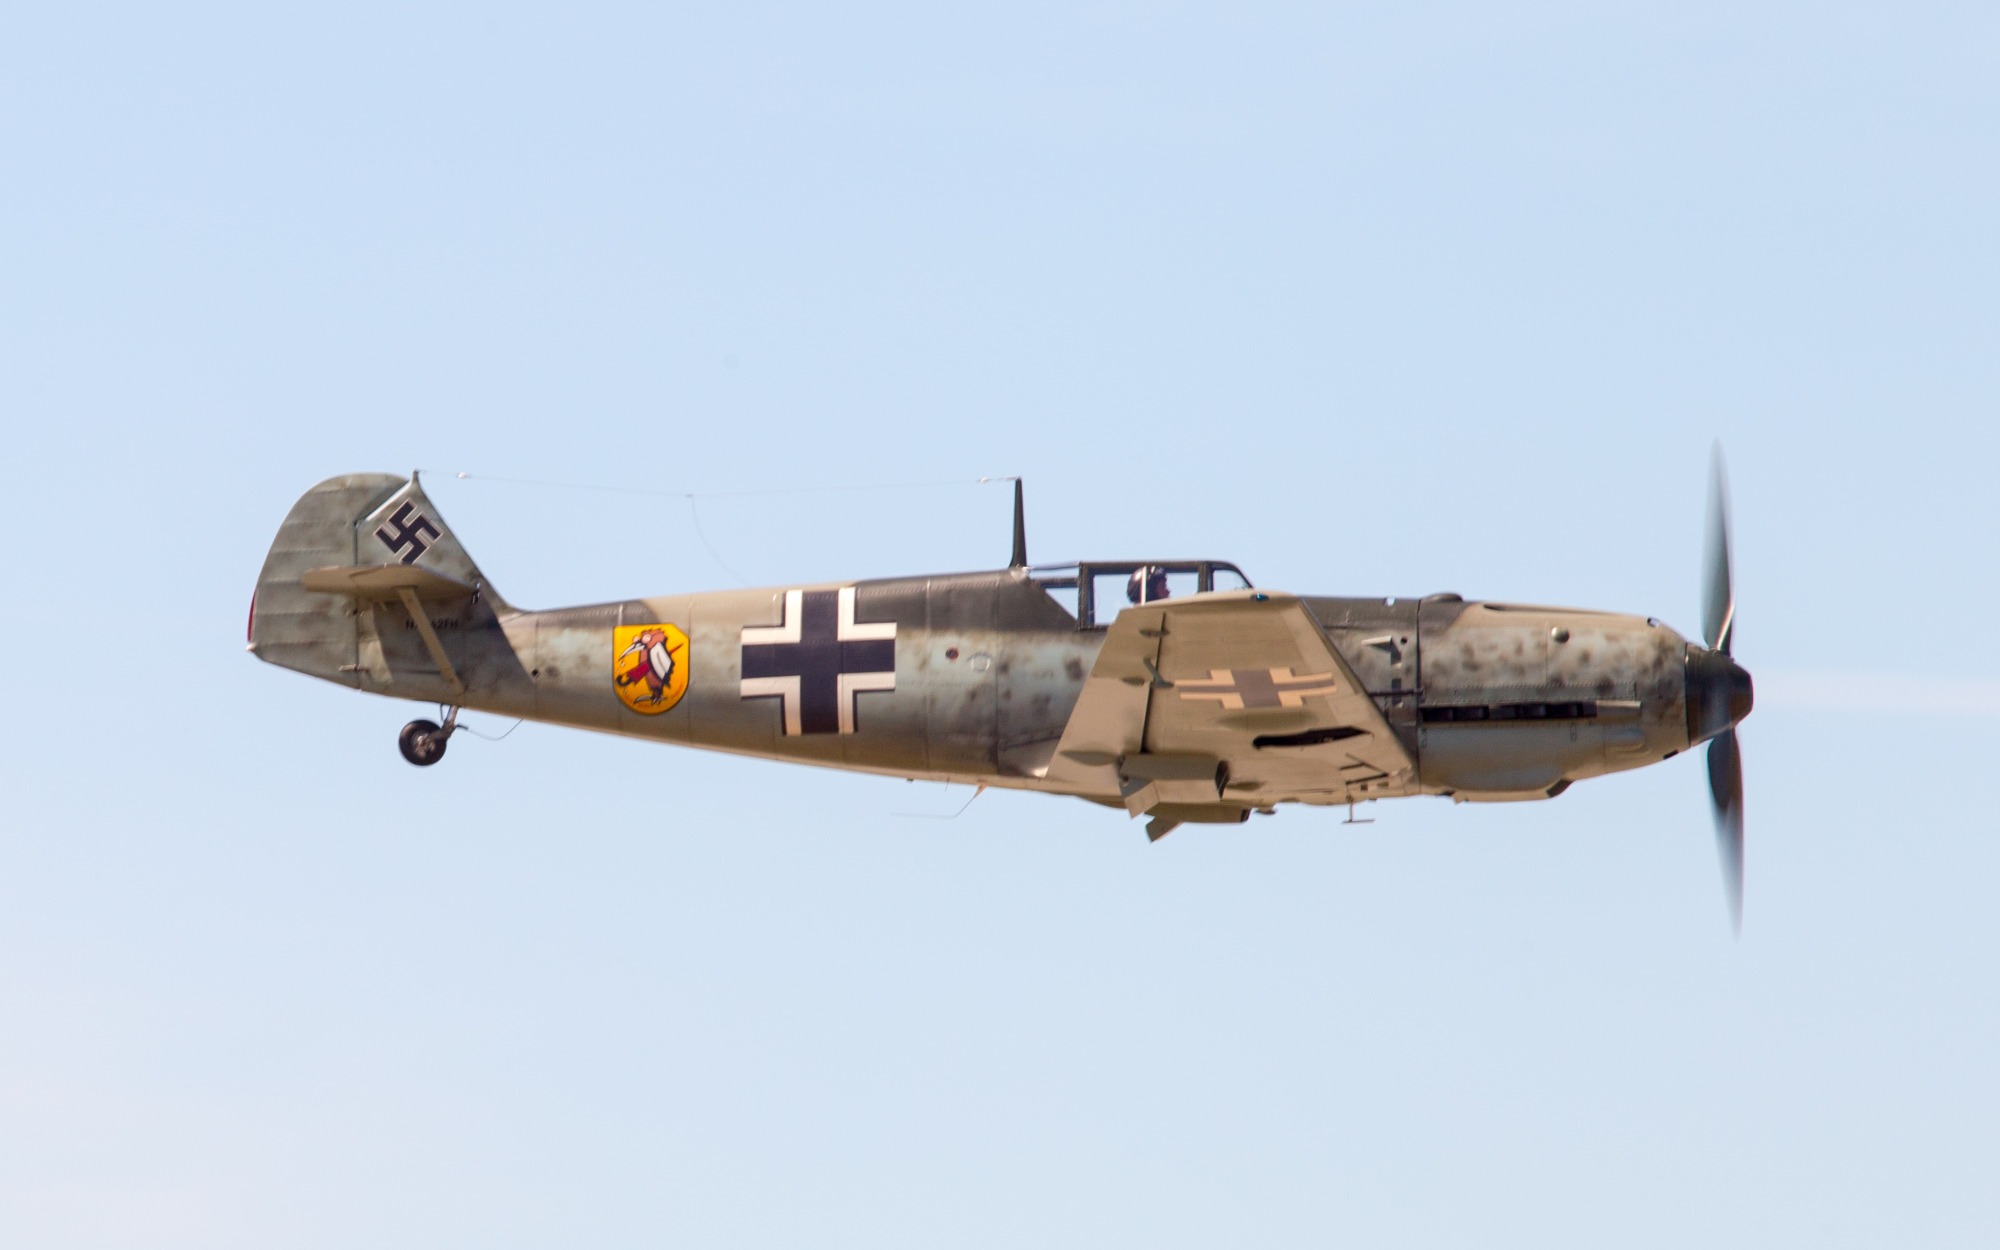 Bf 109: The Best Fighter to Fly During World War II?